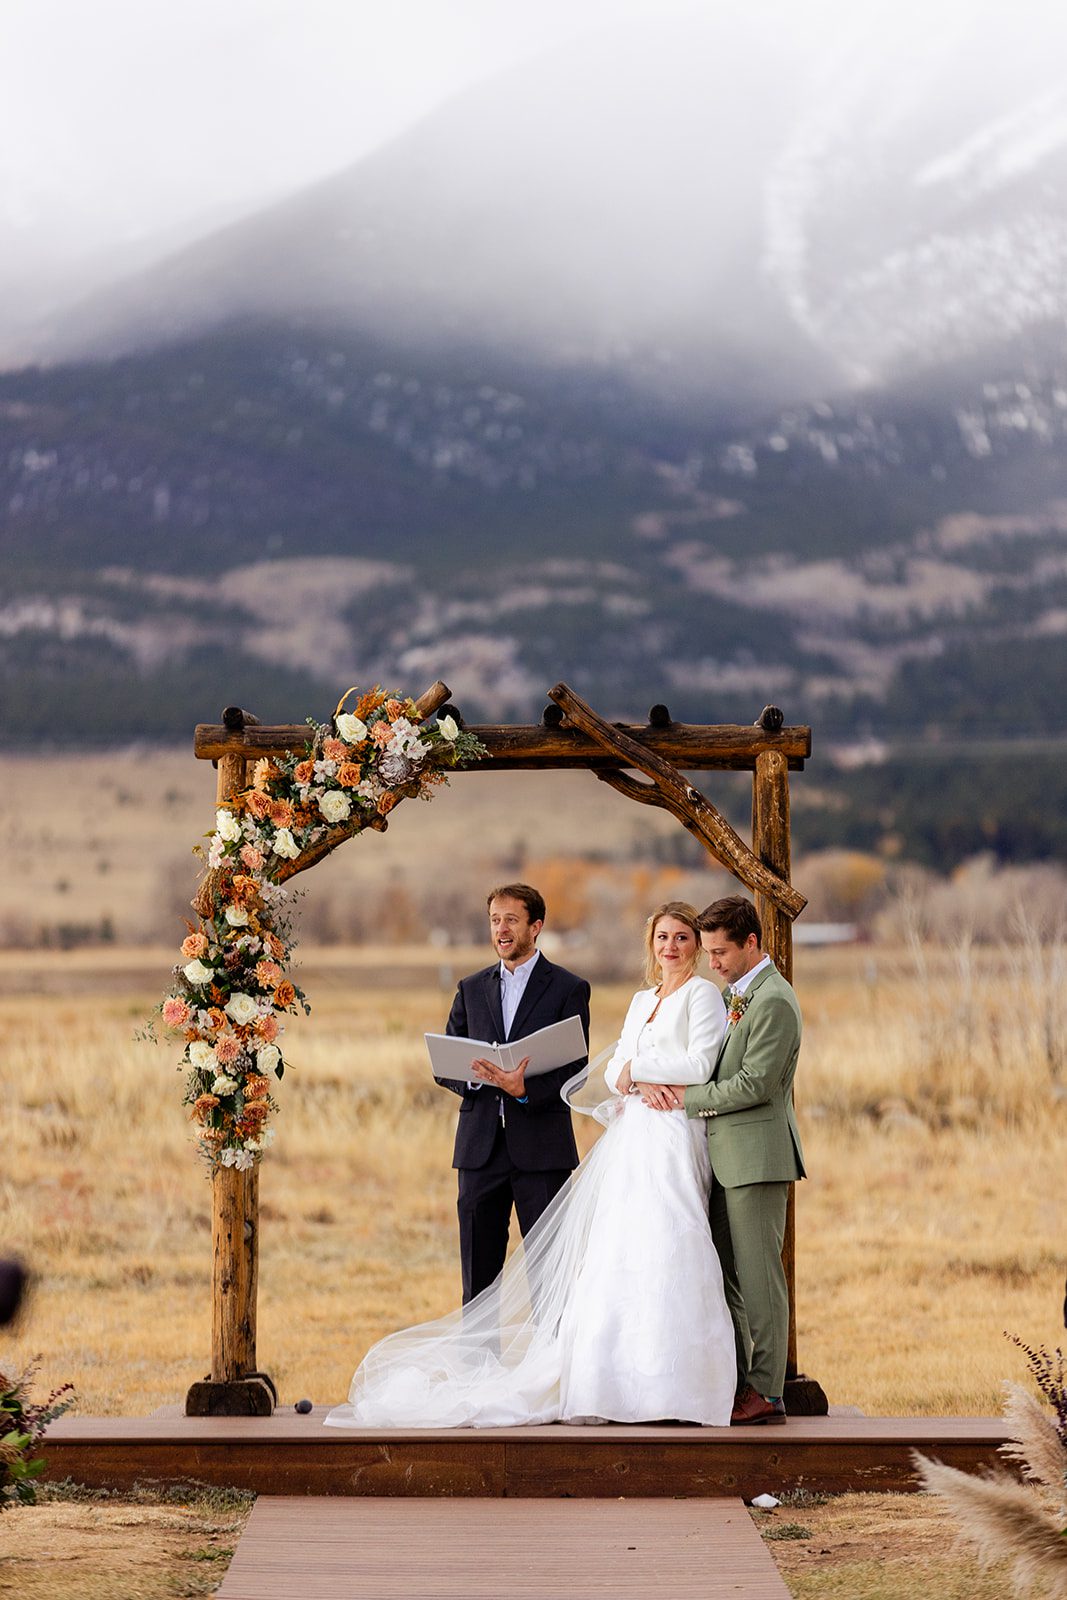 Ceremony at The Barn at Sunset Ranch in Buena Vista Colorado